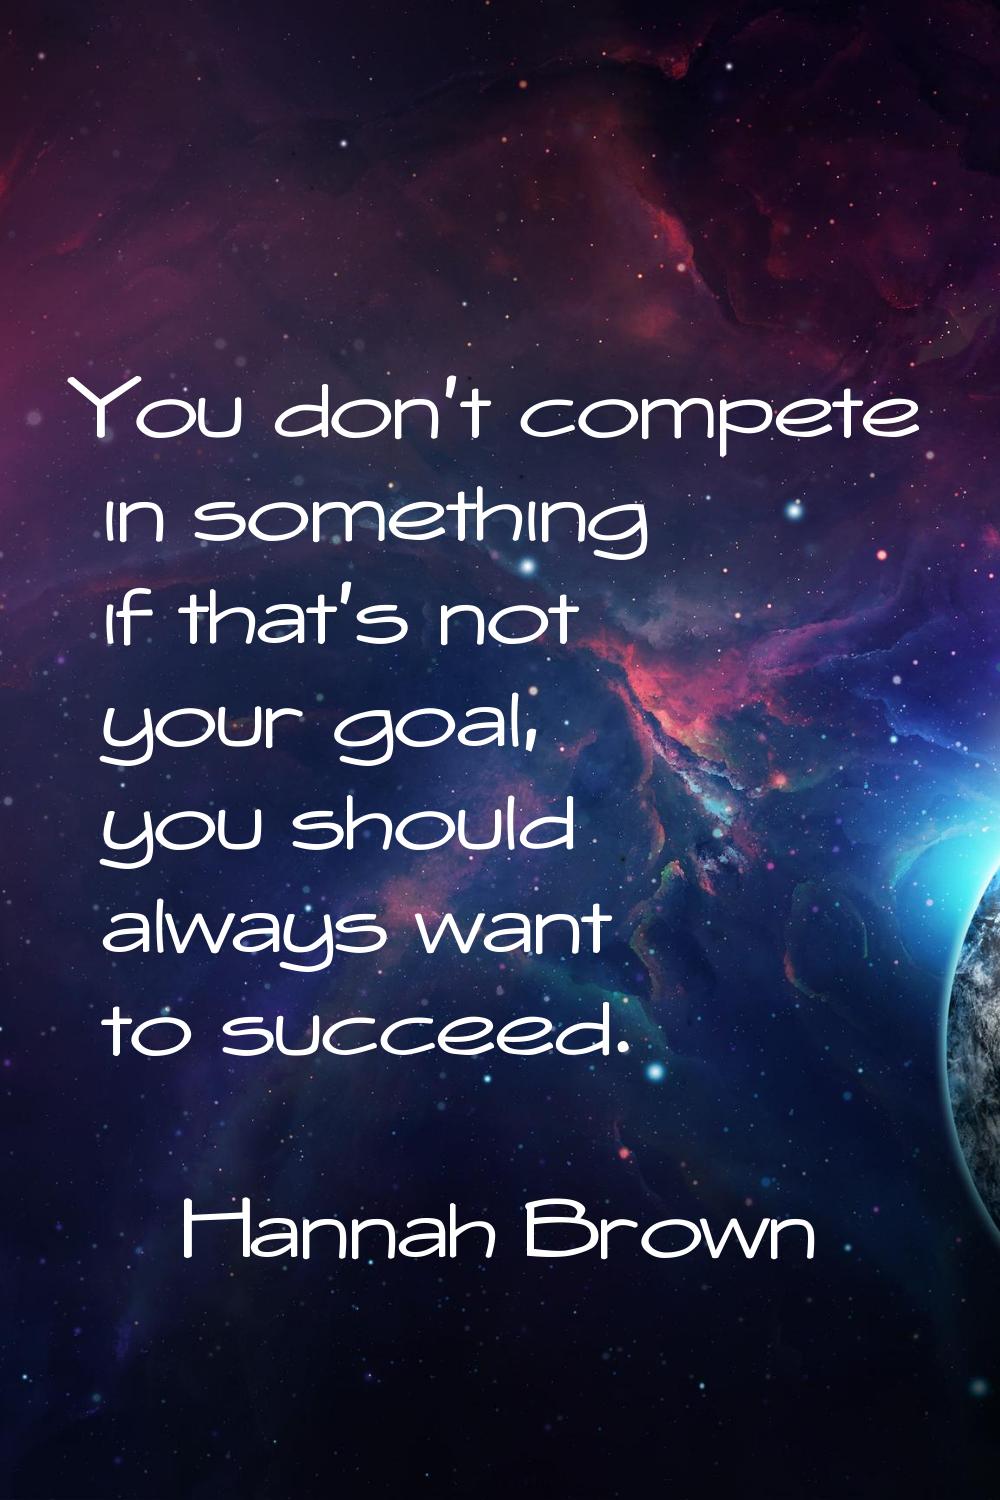 You don't compete in something if that's not your goal, you should always want to succeed.